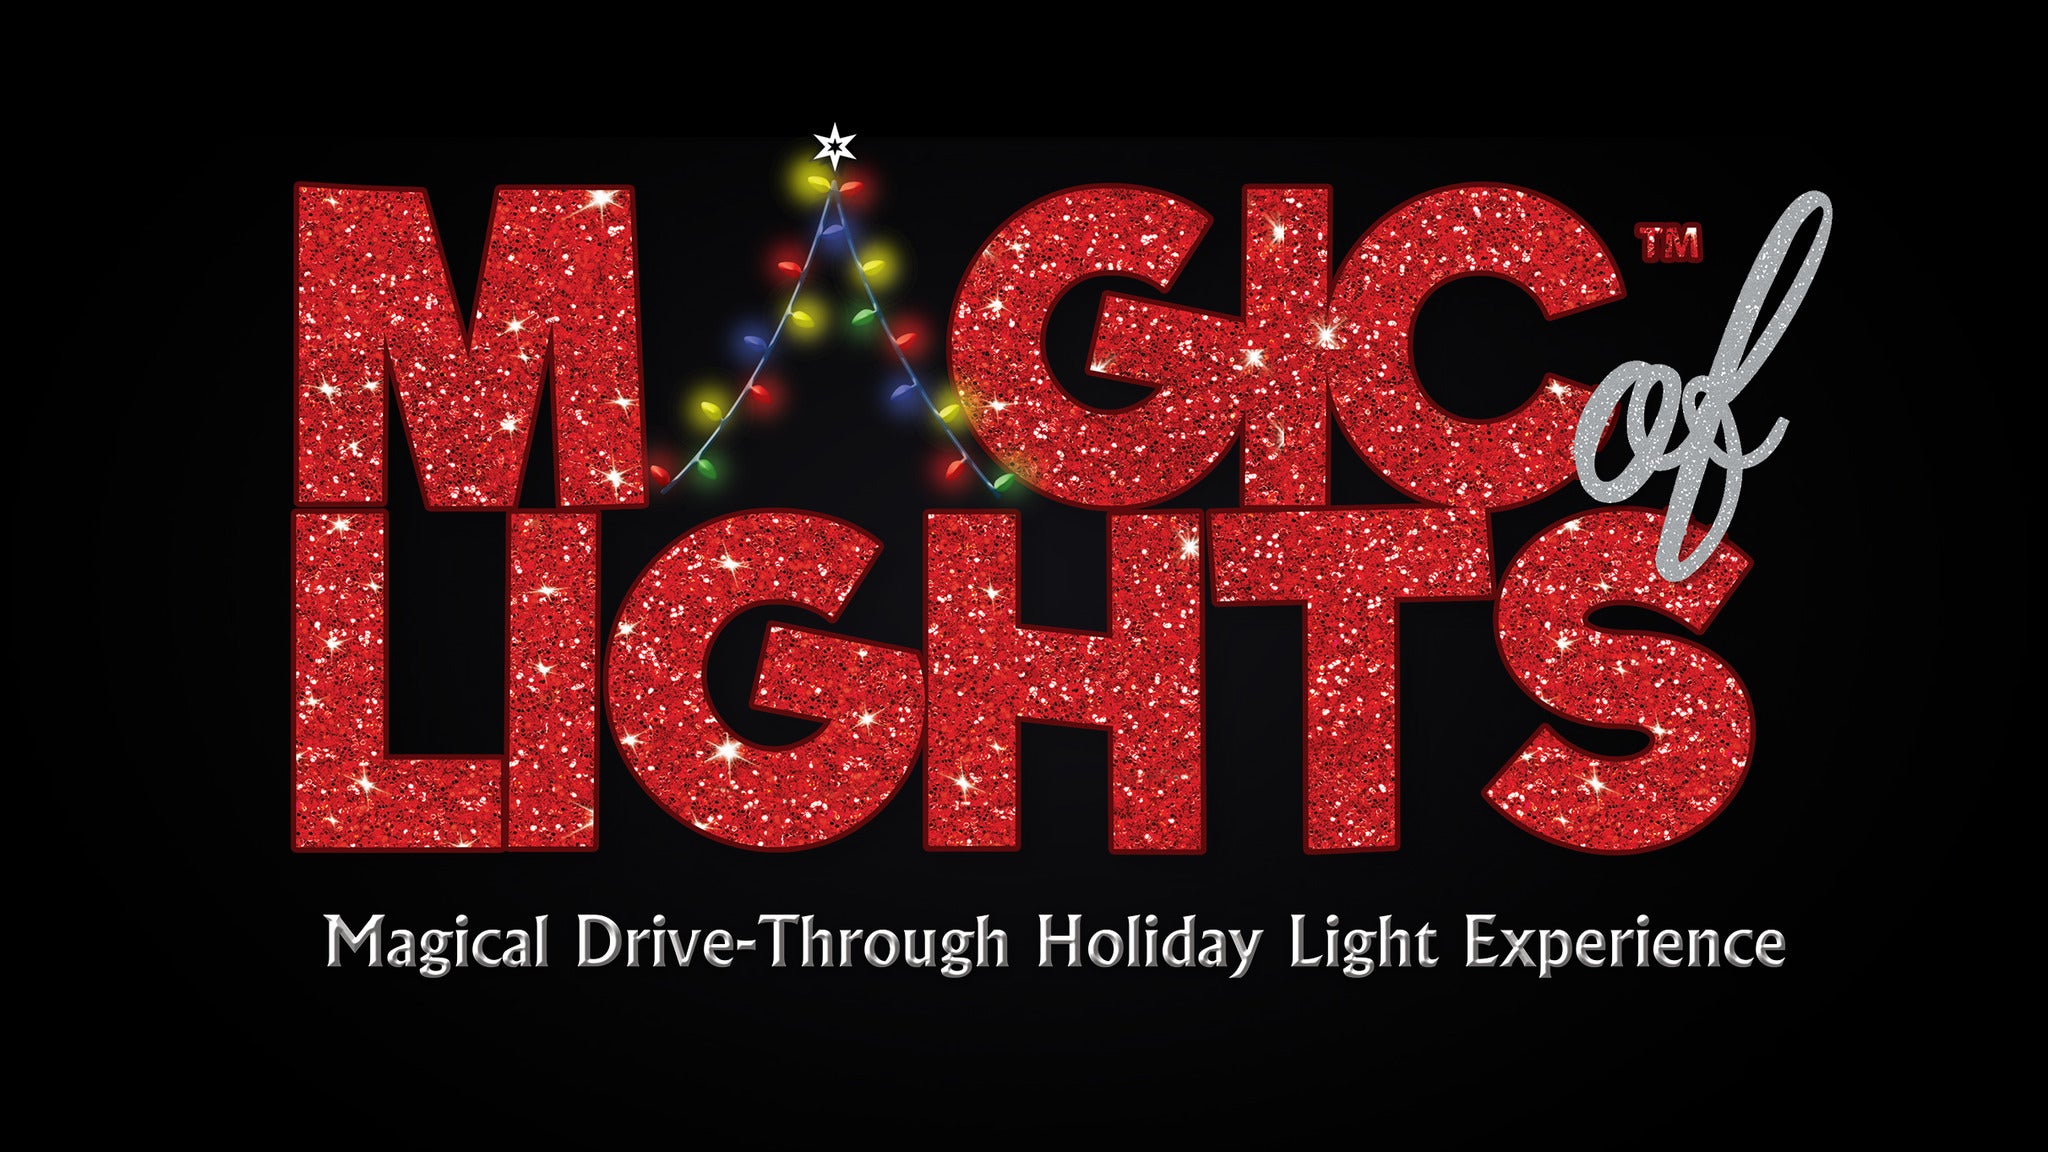 Magic Of Lights: Drive-Through Holiday Lights Experience in Noblesville promo photo for Live Nation presale offer code